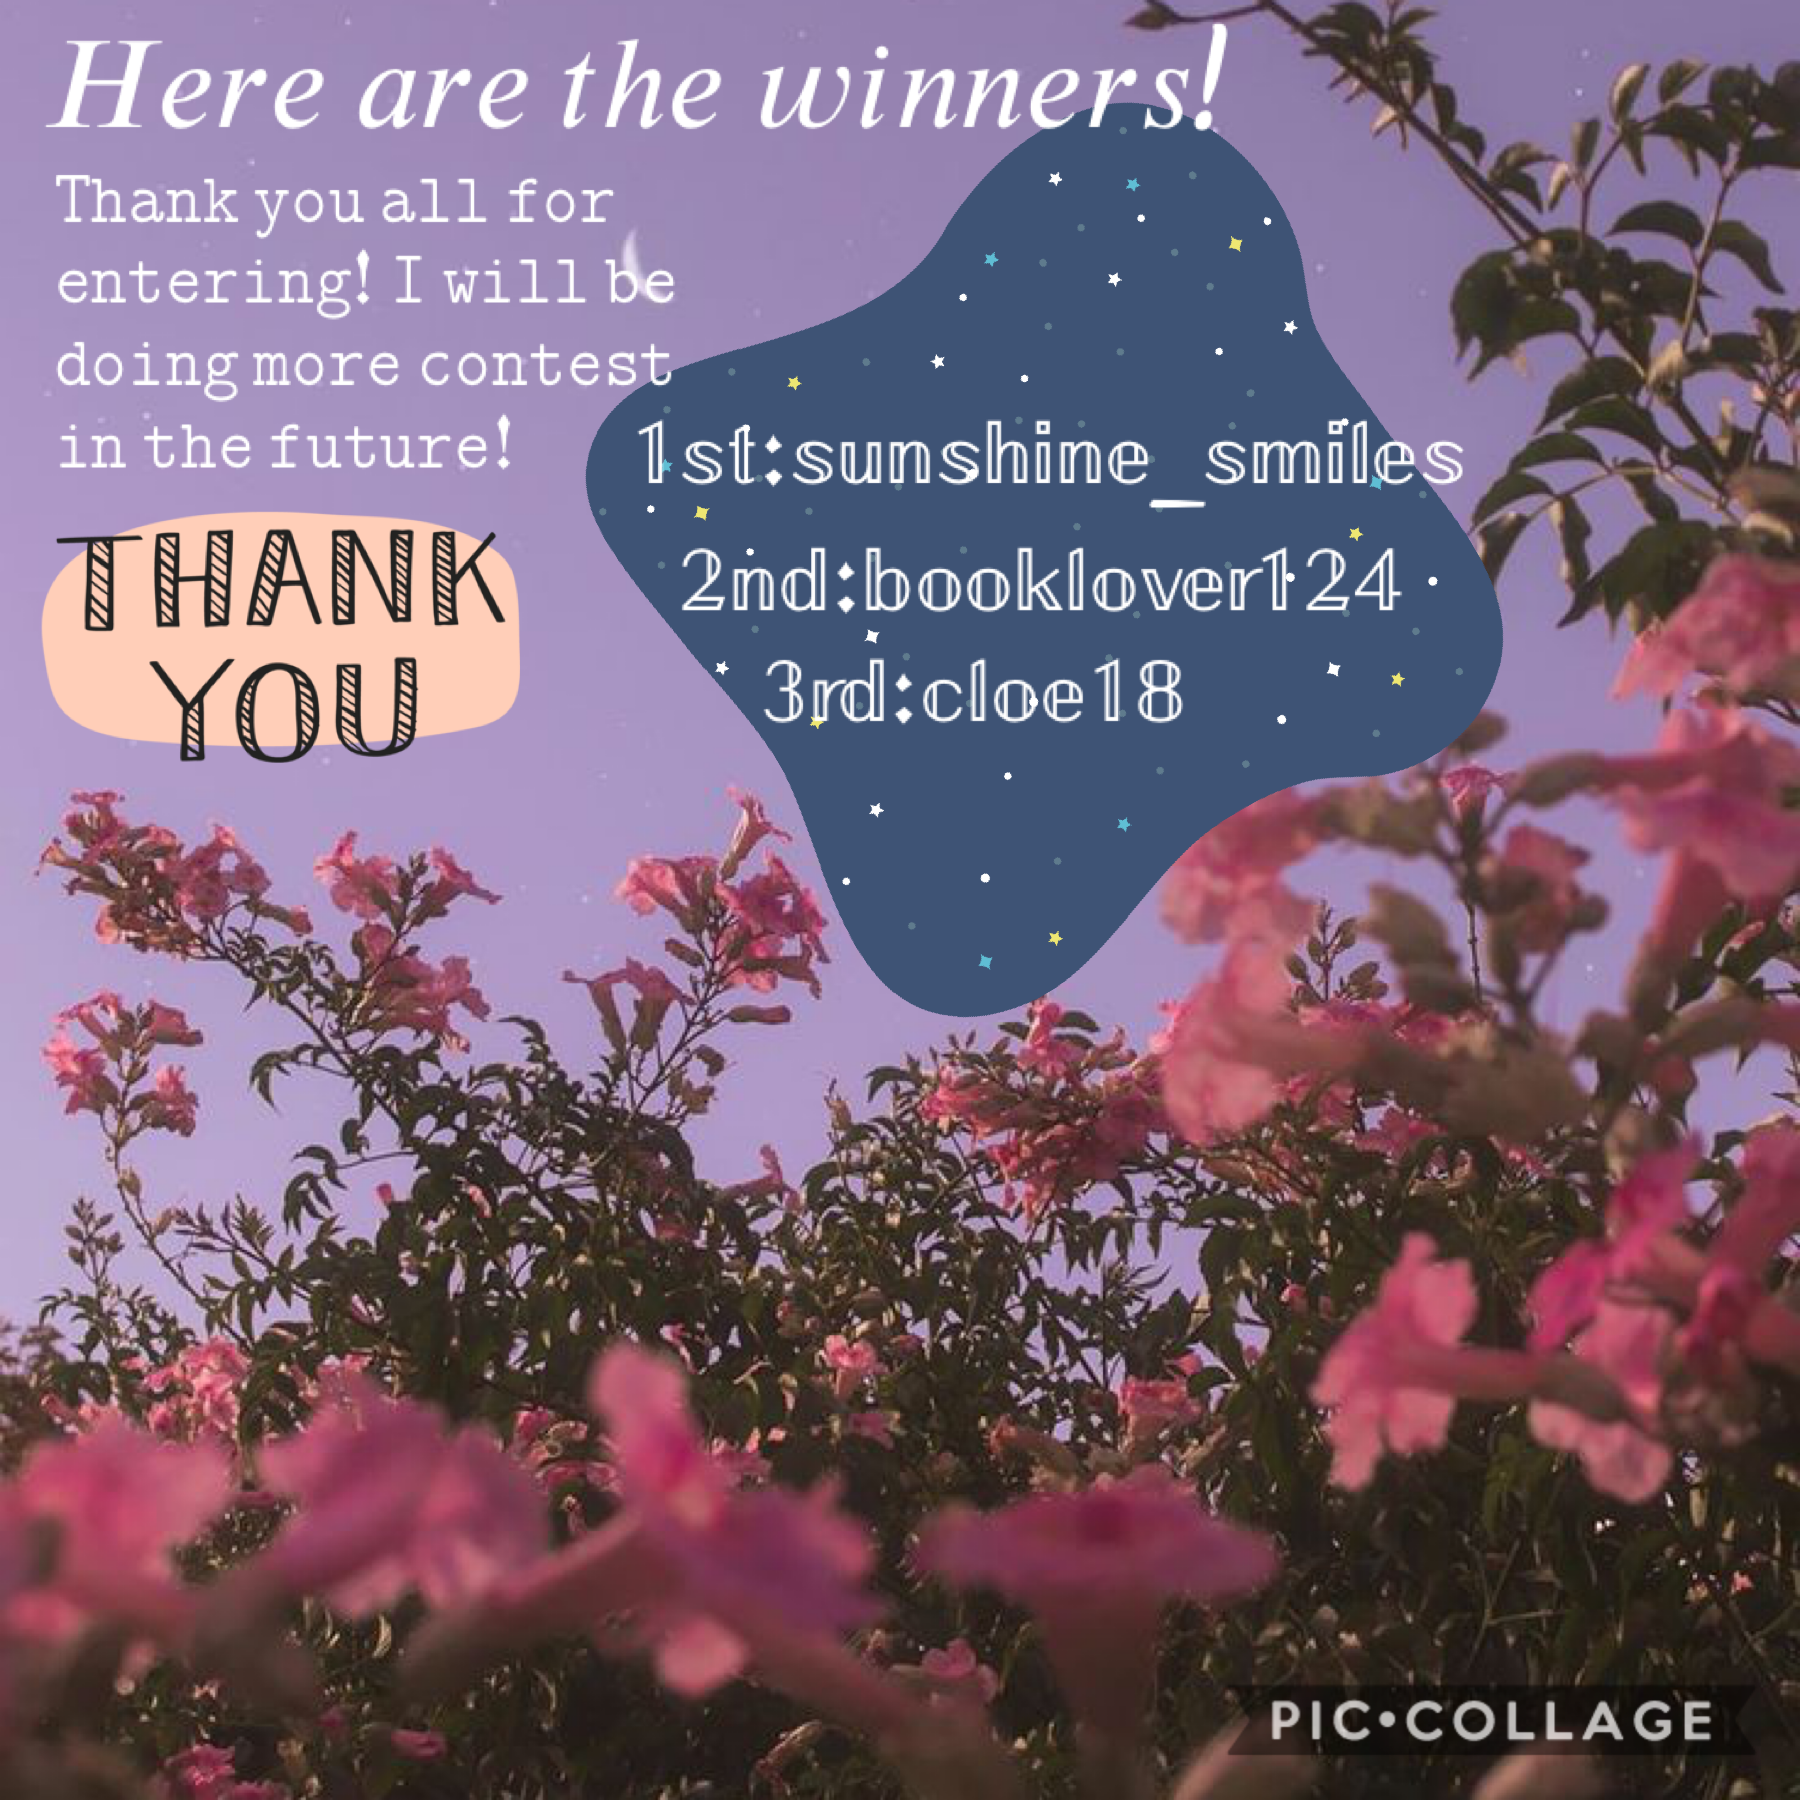 Thank you to the people that joined in! I will have more contest in the future! 